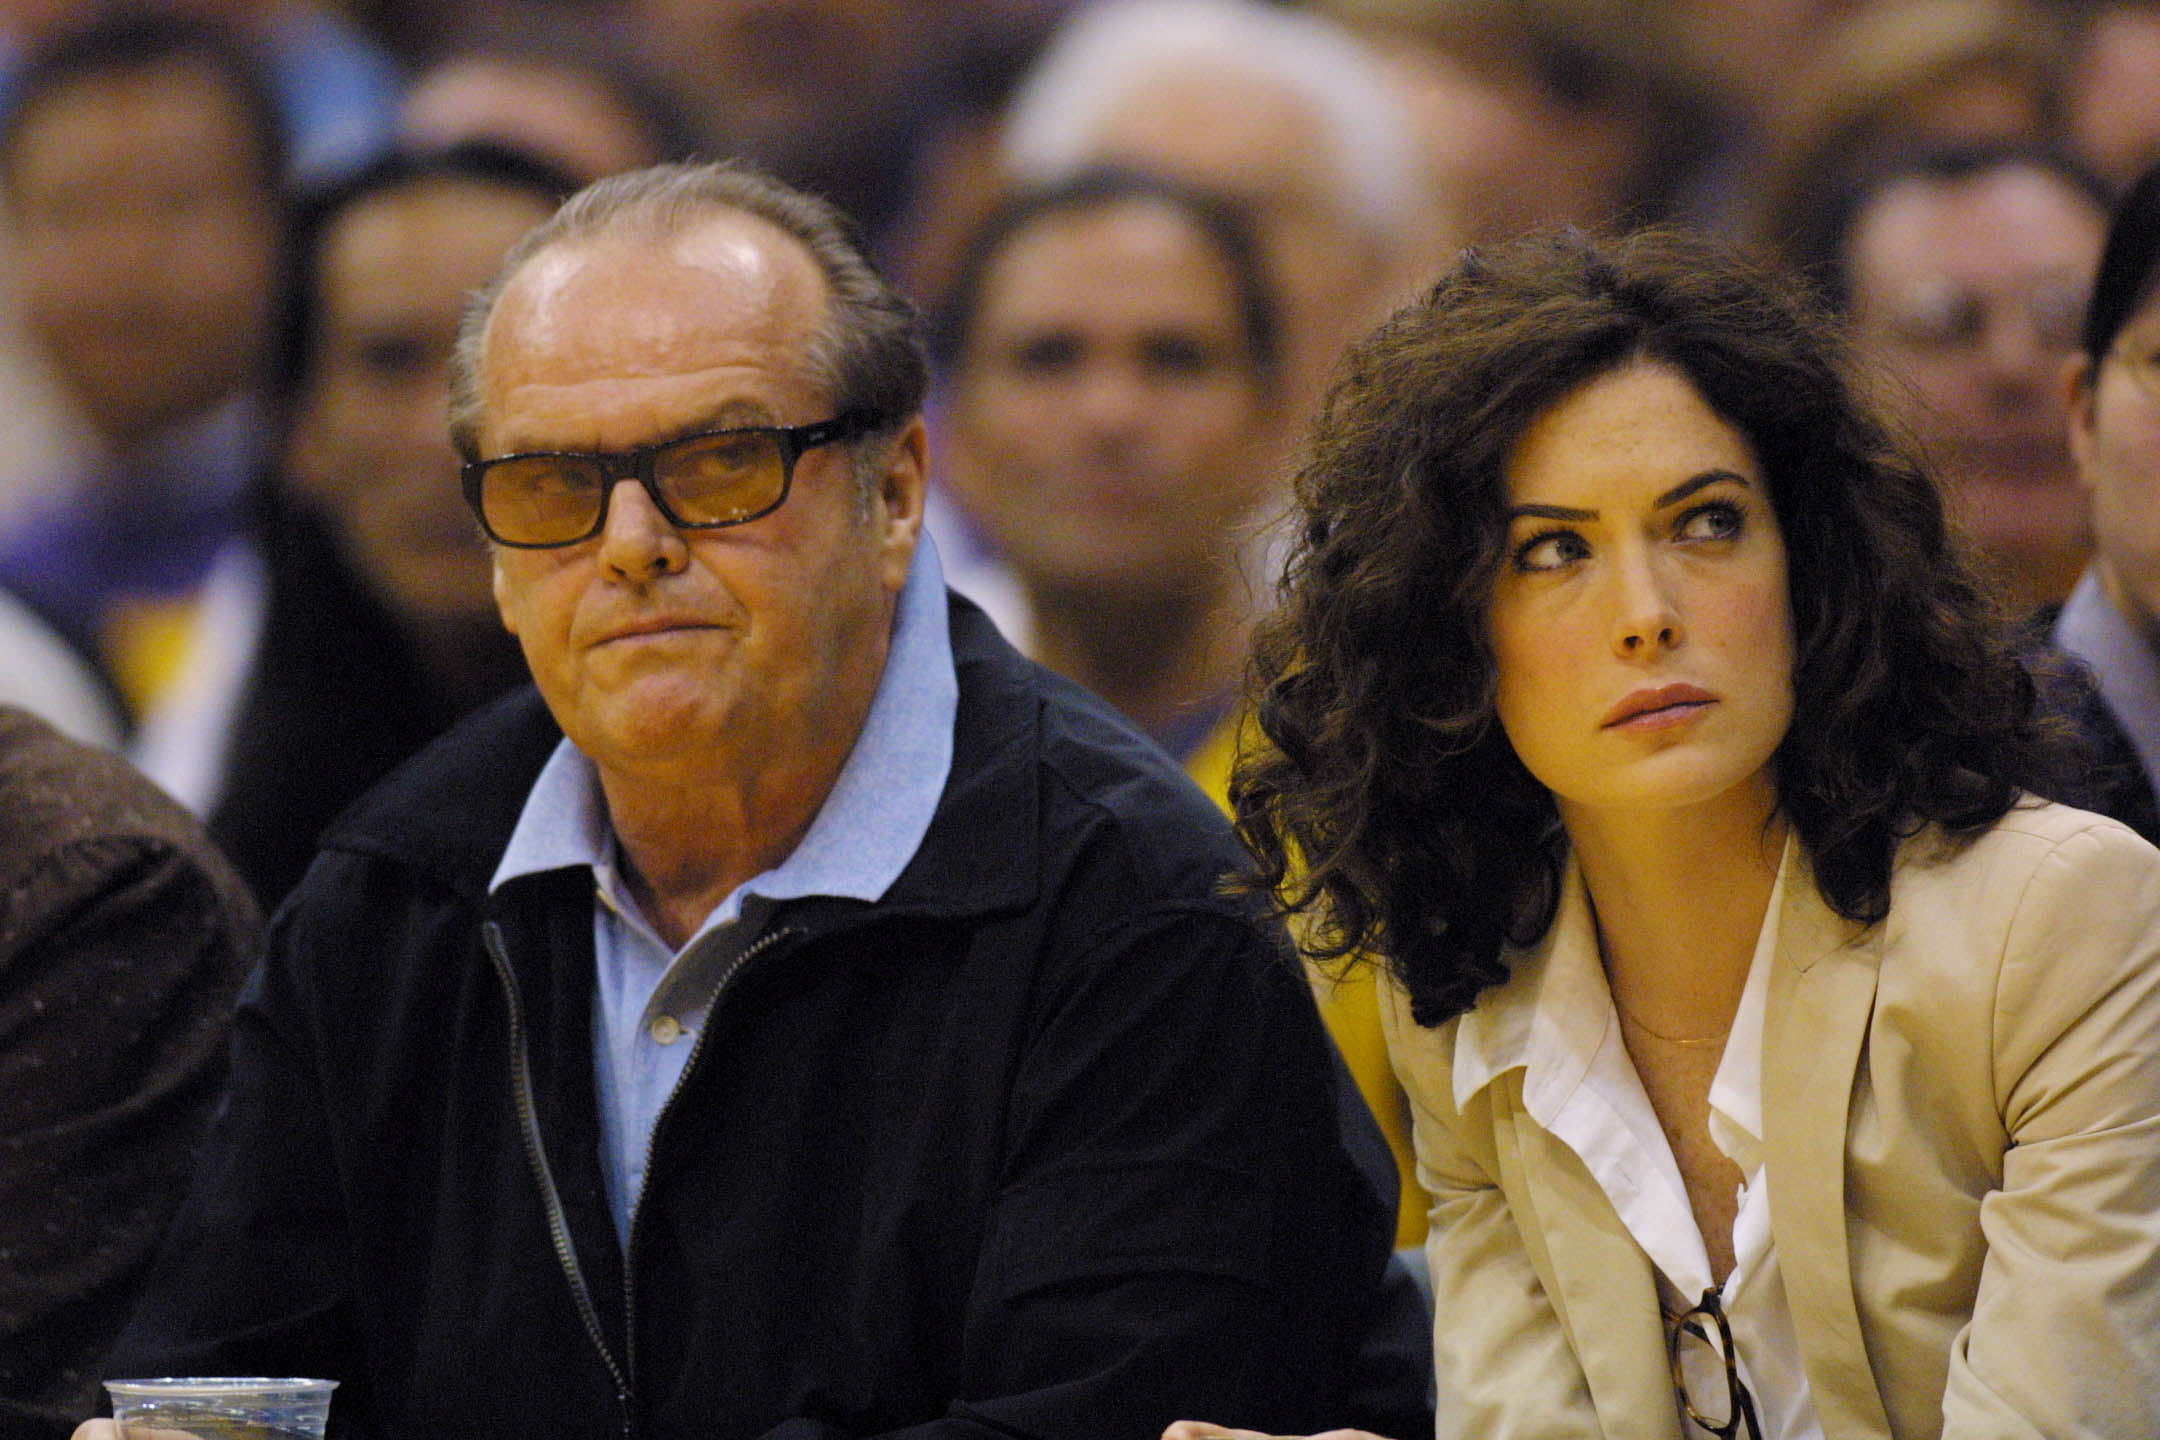 Jack Nicholson and Lara Flynn Boyle attend a game between the Los Angeles Lakers and the San Antonio Spurs | Source: Getty Images